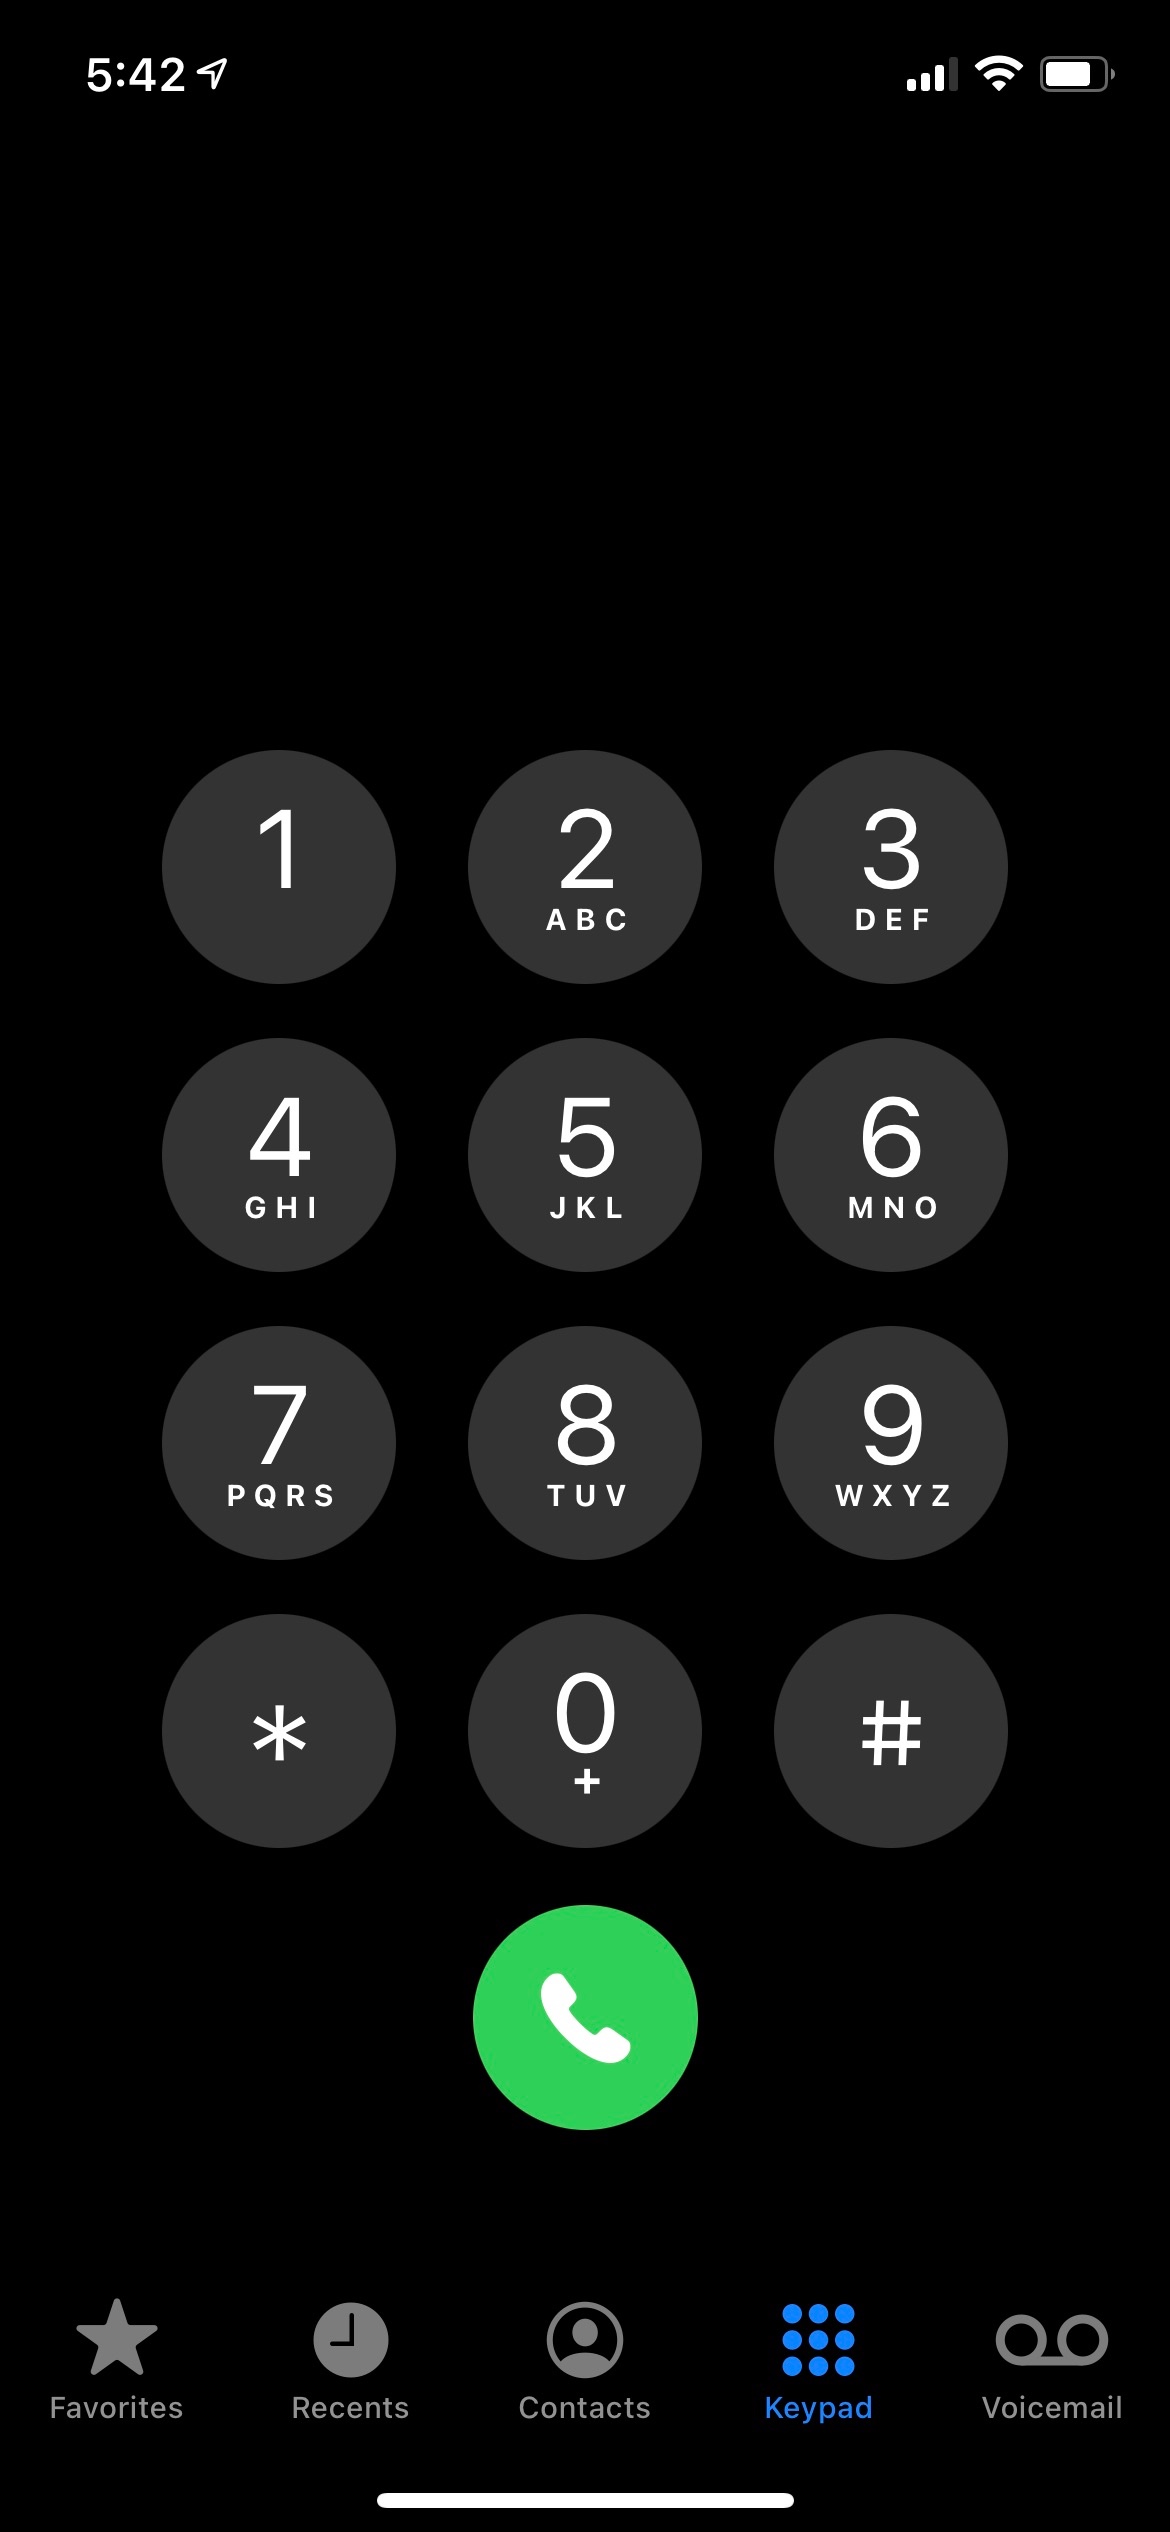 How to type letters when dialing on iPhone - Apple Community